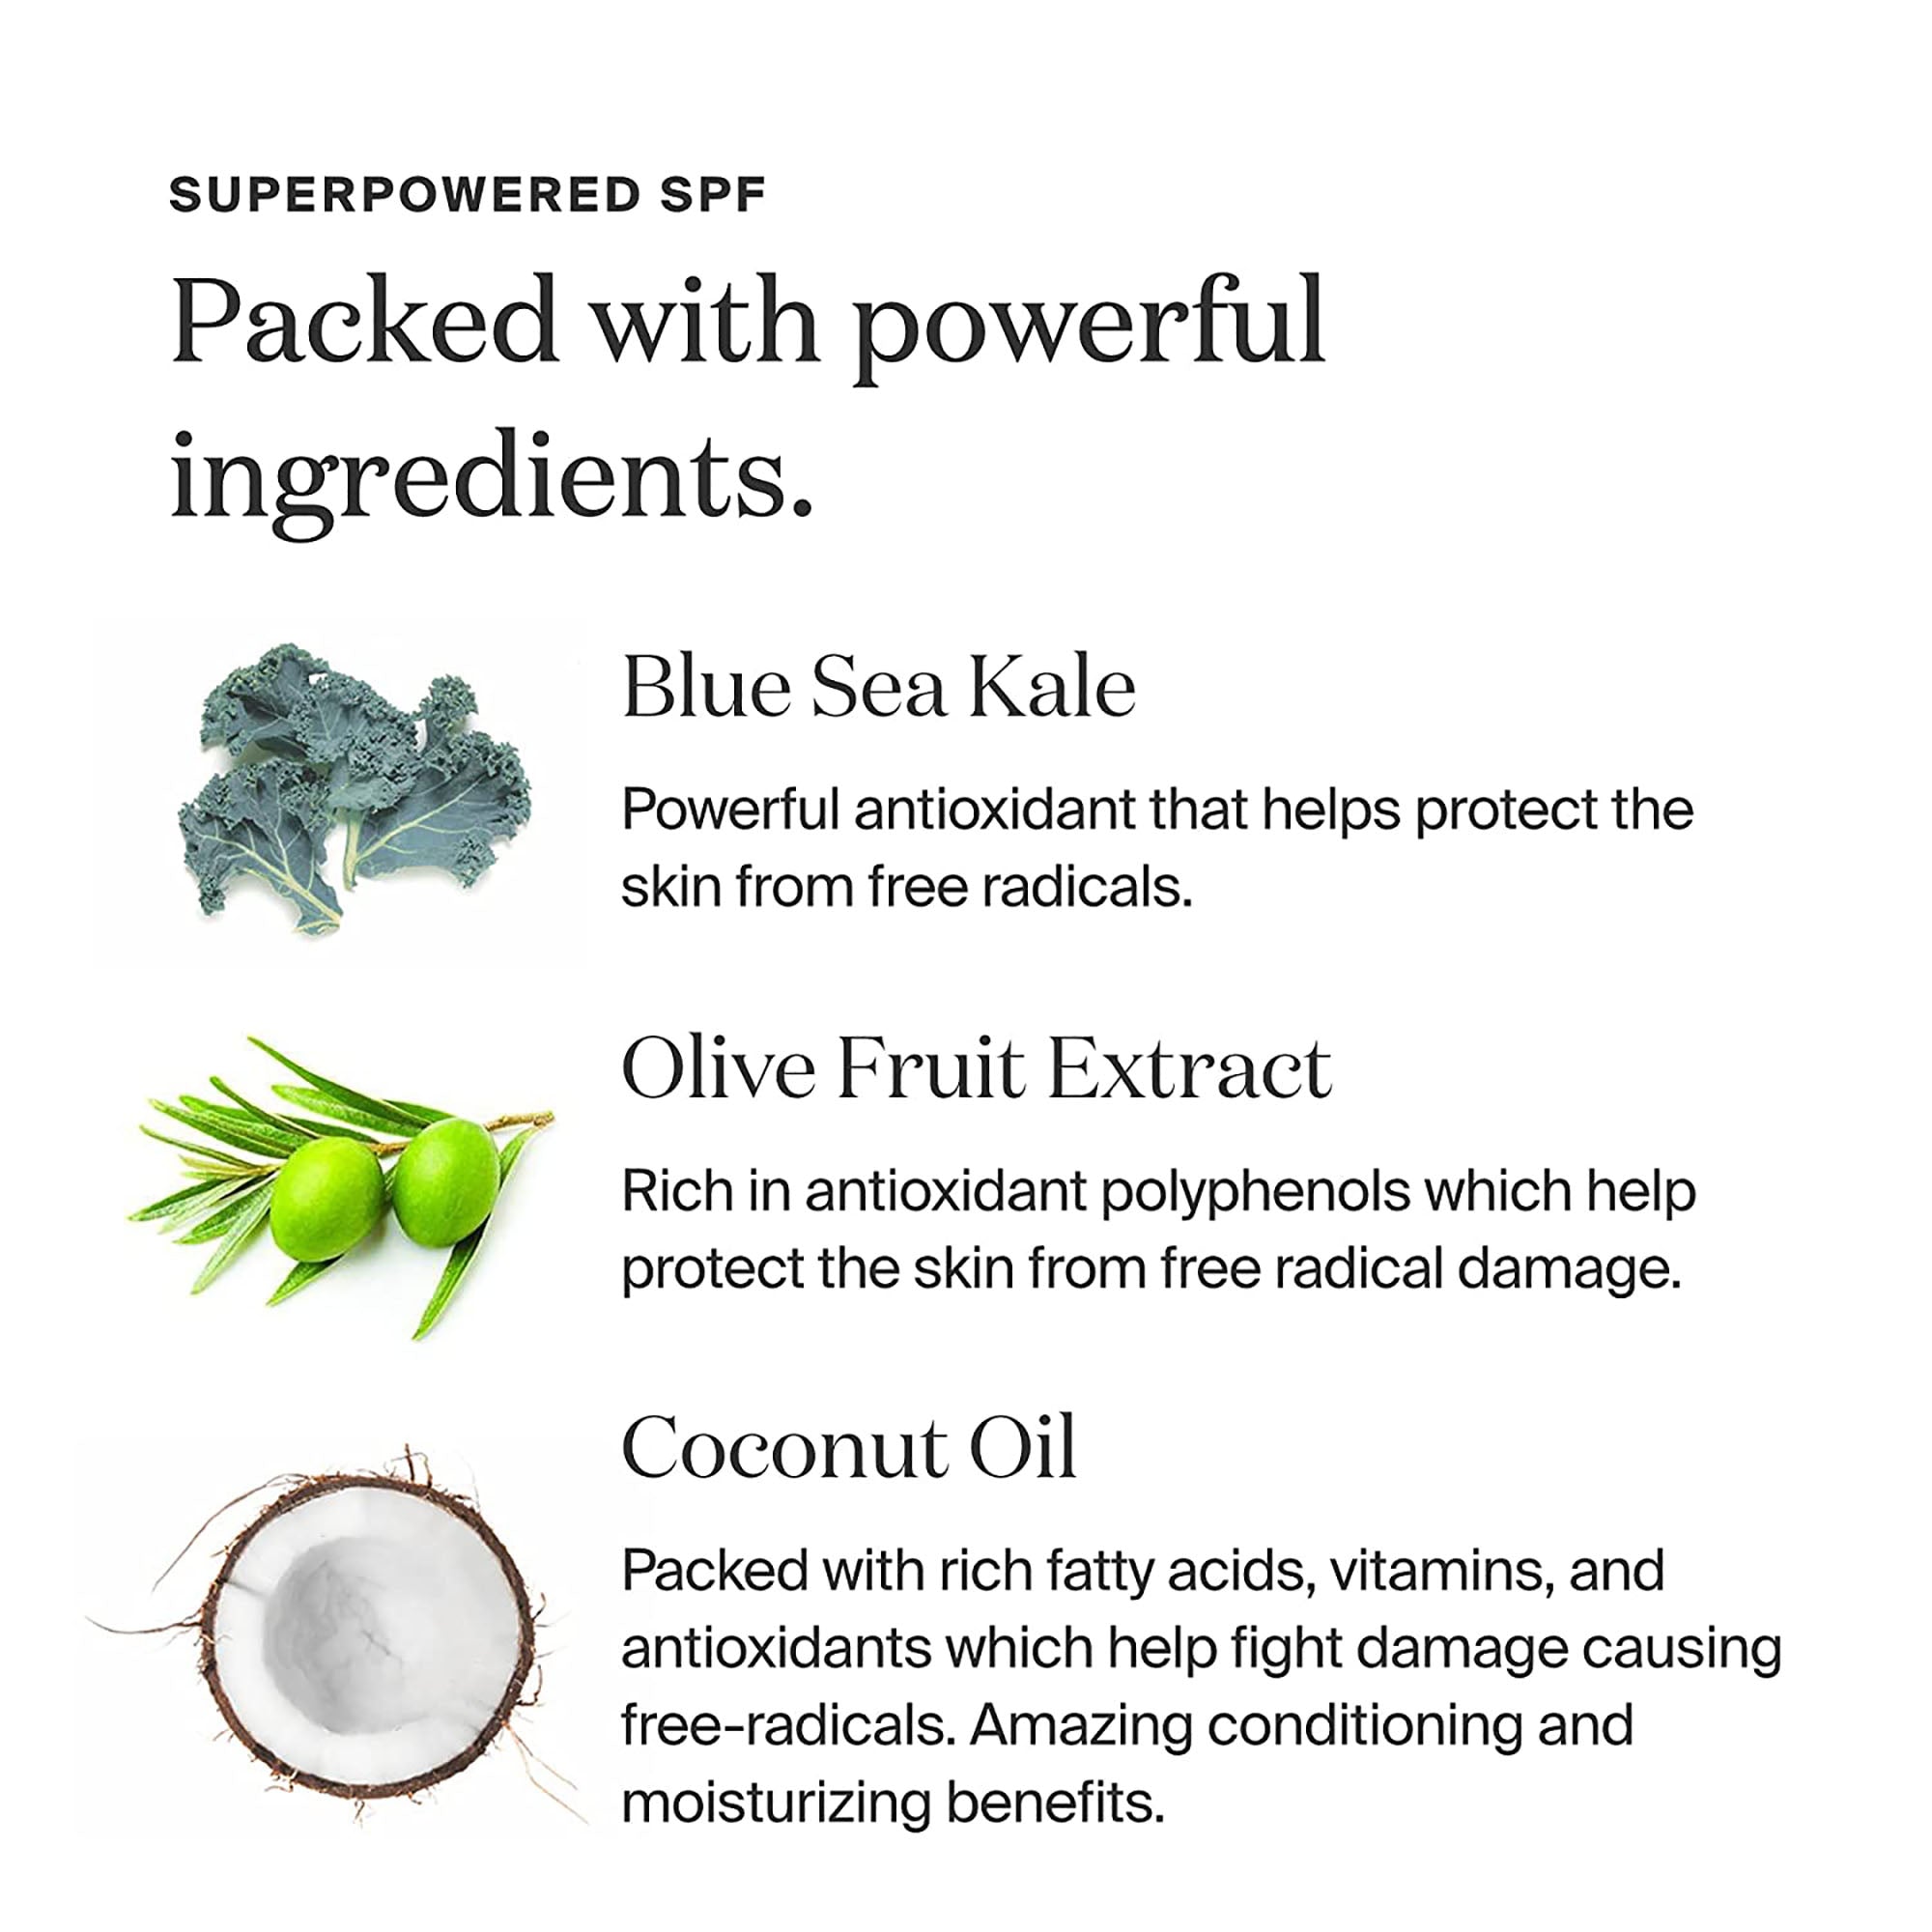 Supergoop! PLAY Body Mousse SPF 50 with Blue Sea Kale / 6.5OZ